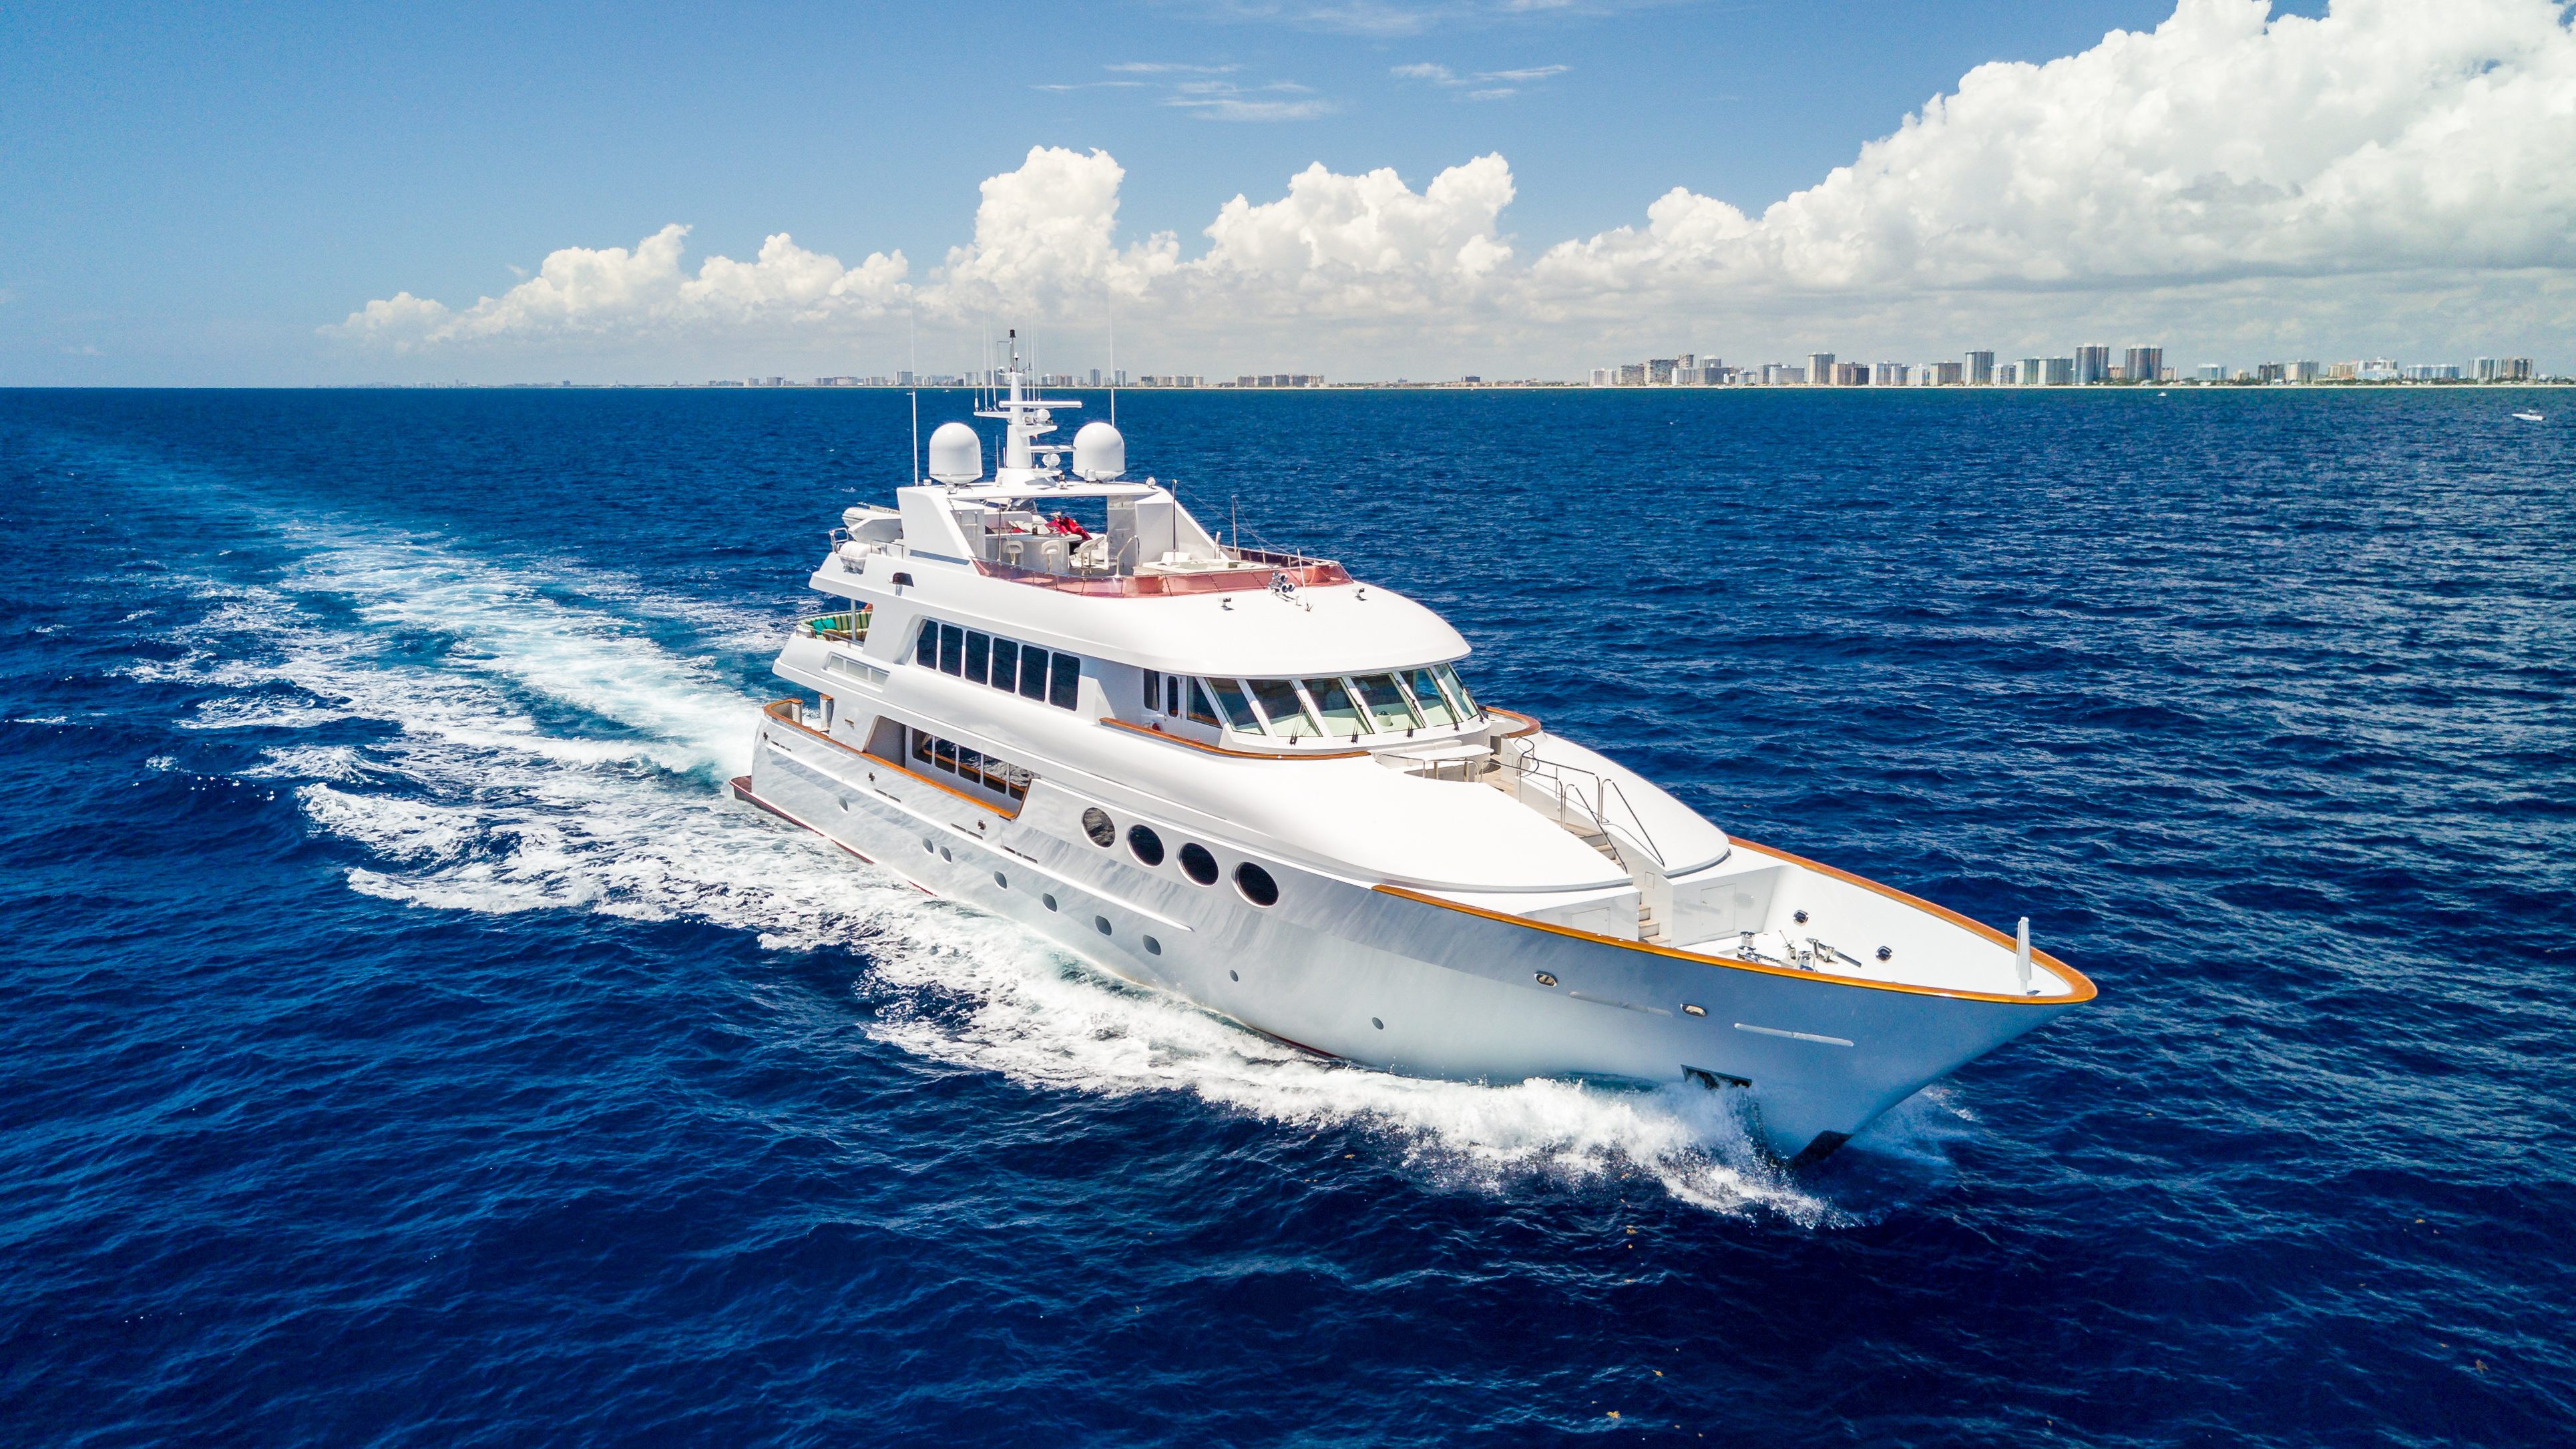 RELENTLESS charter specs and number of guests